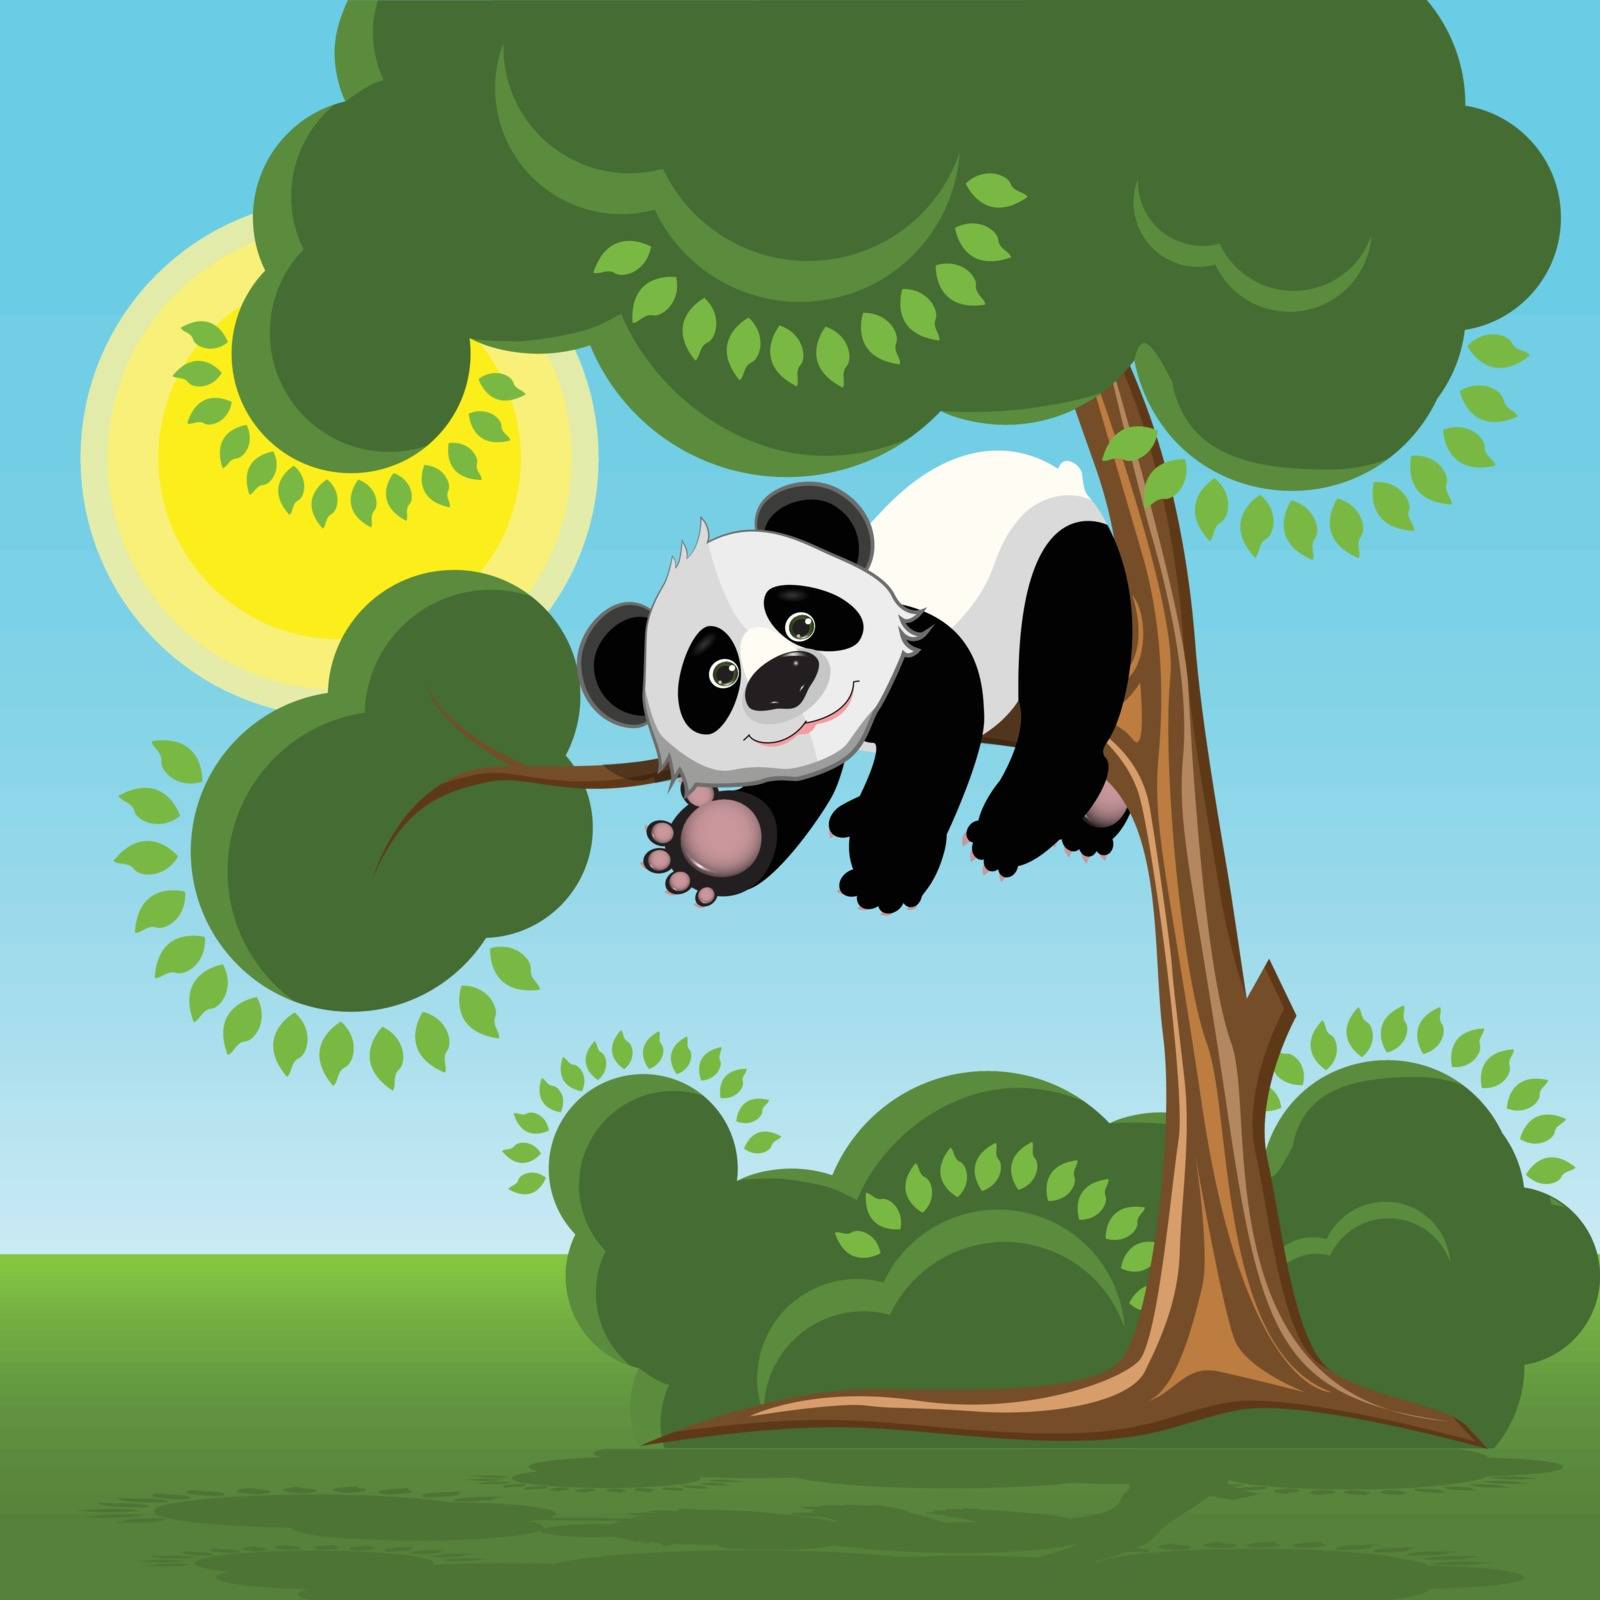 Illustration Panda on the Tree on the Background of the Blue Sky